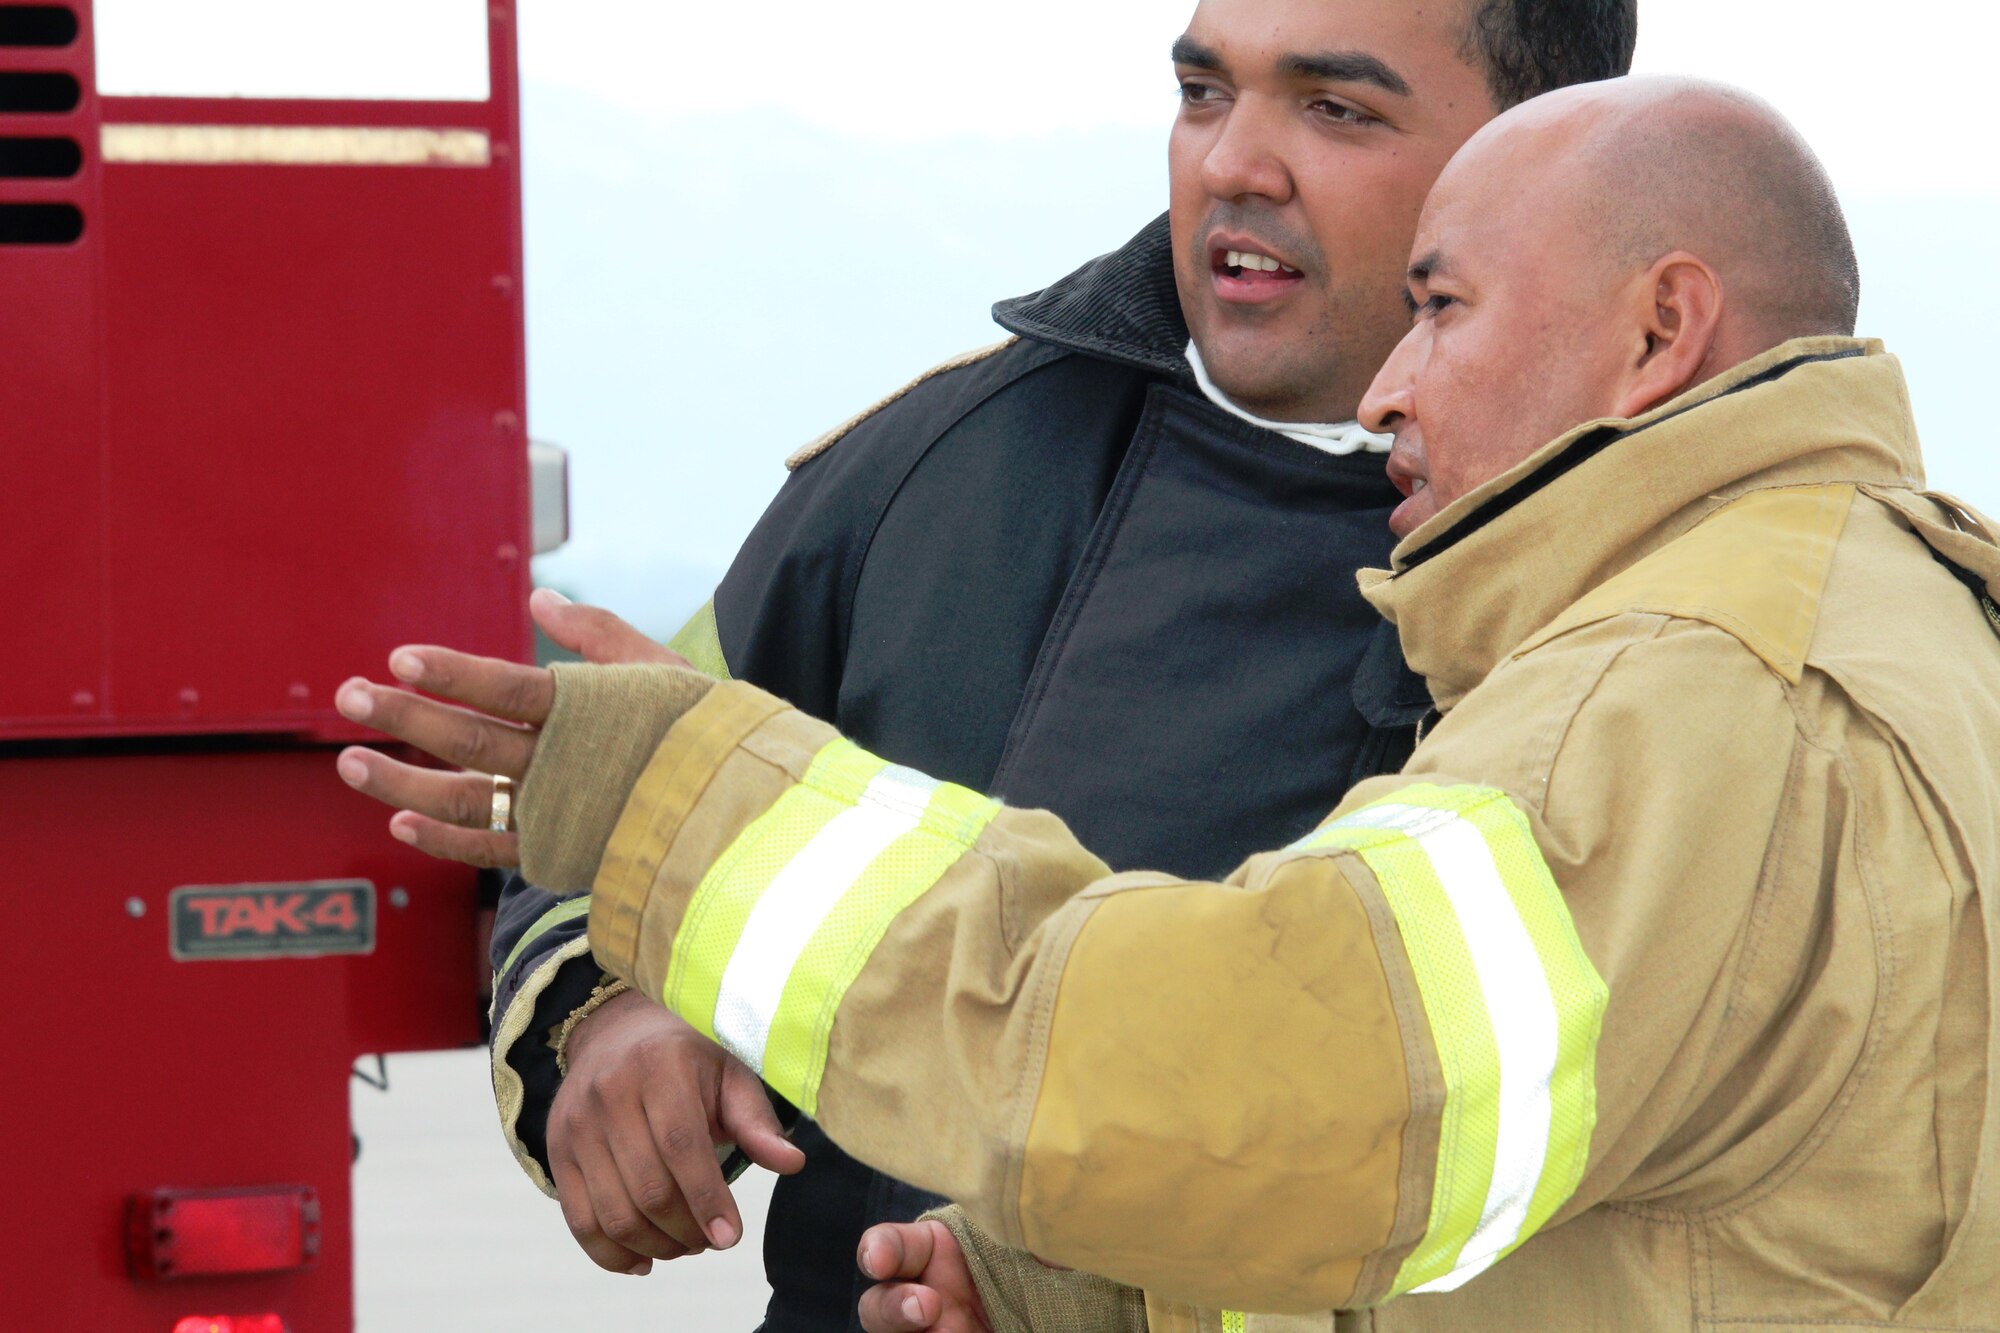 SOTO CANO AIR BASE, Honduras - SOTO CANO AIR BASE, Honduras - Miguel Matus, a firefighter from the Belize National Fire Service (front), and Edgar Peña, a firefighter from the Honduran Fire Department (back), plan their response to an aircraft fire scenario Aug. 26, 2015during CENTAM SMOKE, a quarterly firefighting exercise hosted by Joint Task Force-Bravo at Soto Cano Air Base, Honduras. CENTAM SMOKE allows firefighters from Central America to train with U.S. firefighters in structural fires, aircraft fires, emergency evacuation and vehicle extractions to build partnership and improve interoperability. (U.S. Army photo by Maria Pinel) 